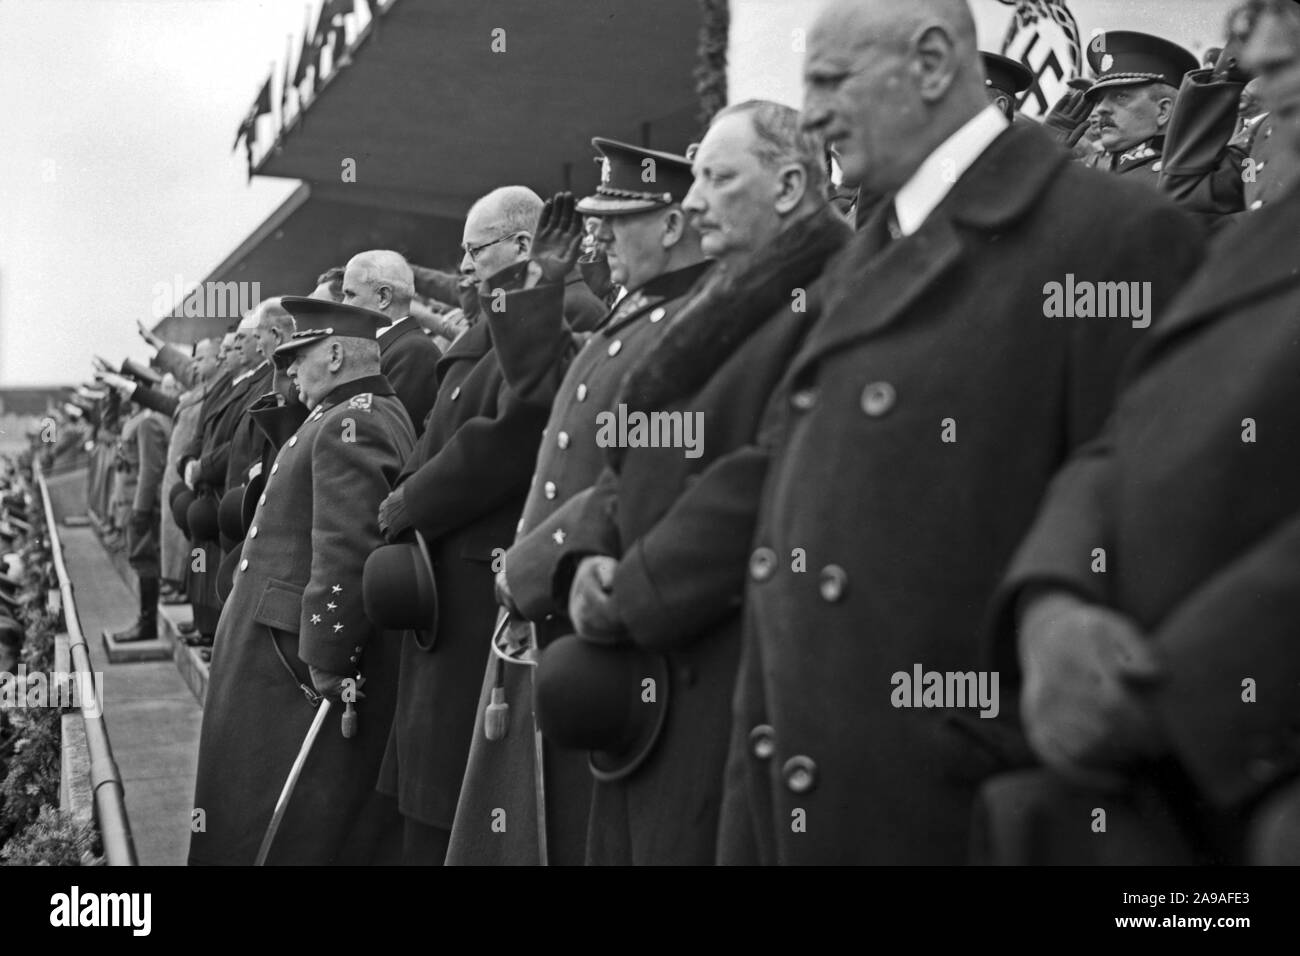 Original caption: Prague, 20 April at Sokol Stadium. During the German national anthem, General Sirory with four gentlemen of the army staff. Stock Photo